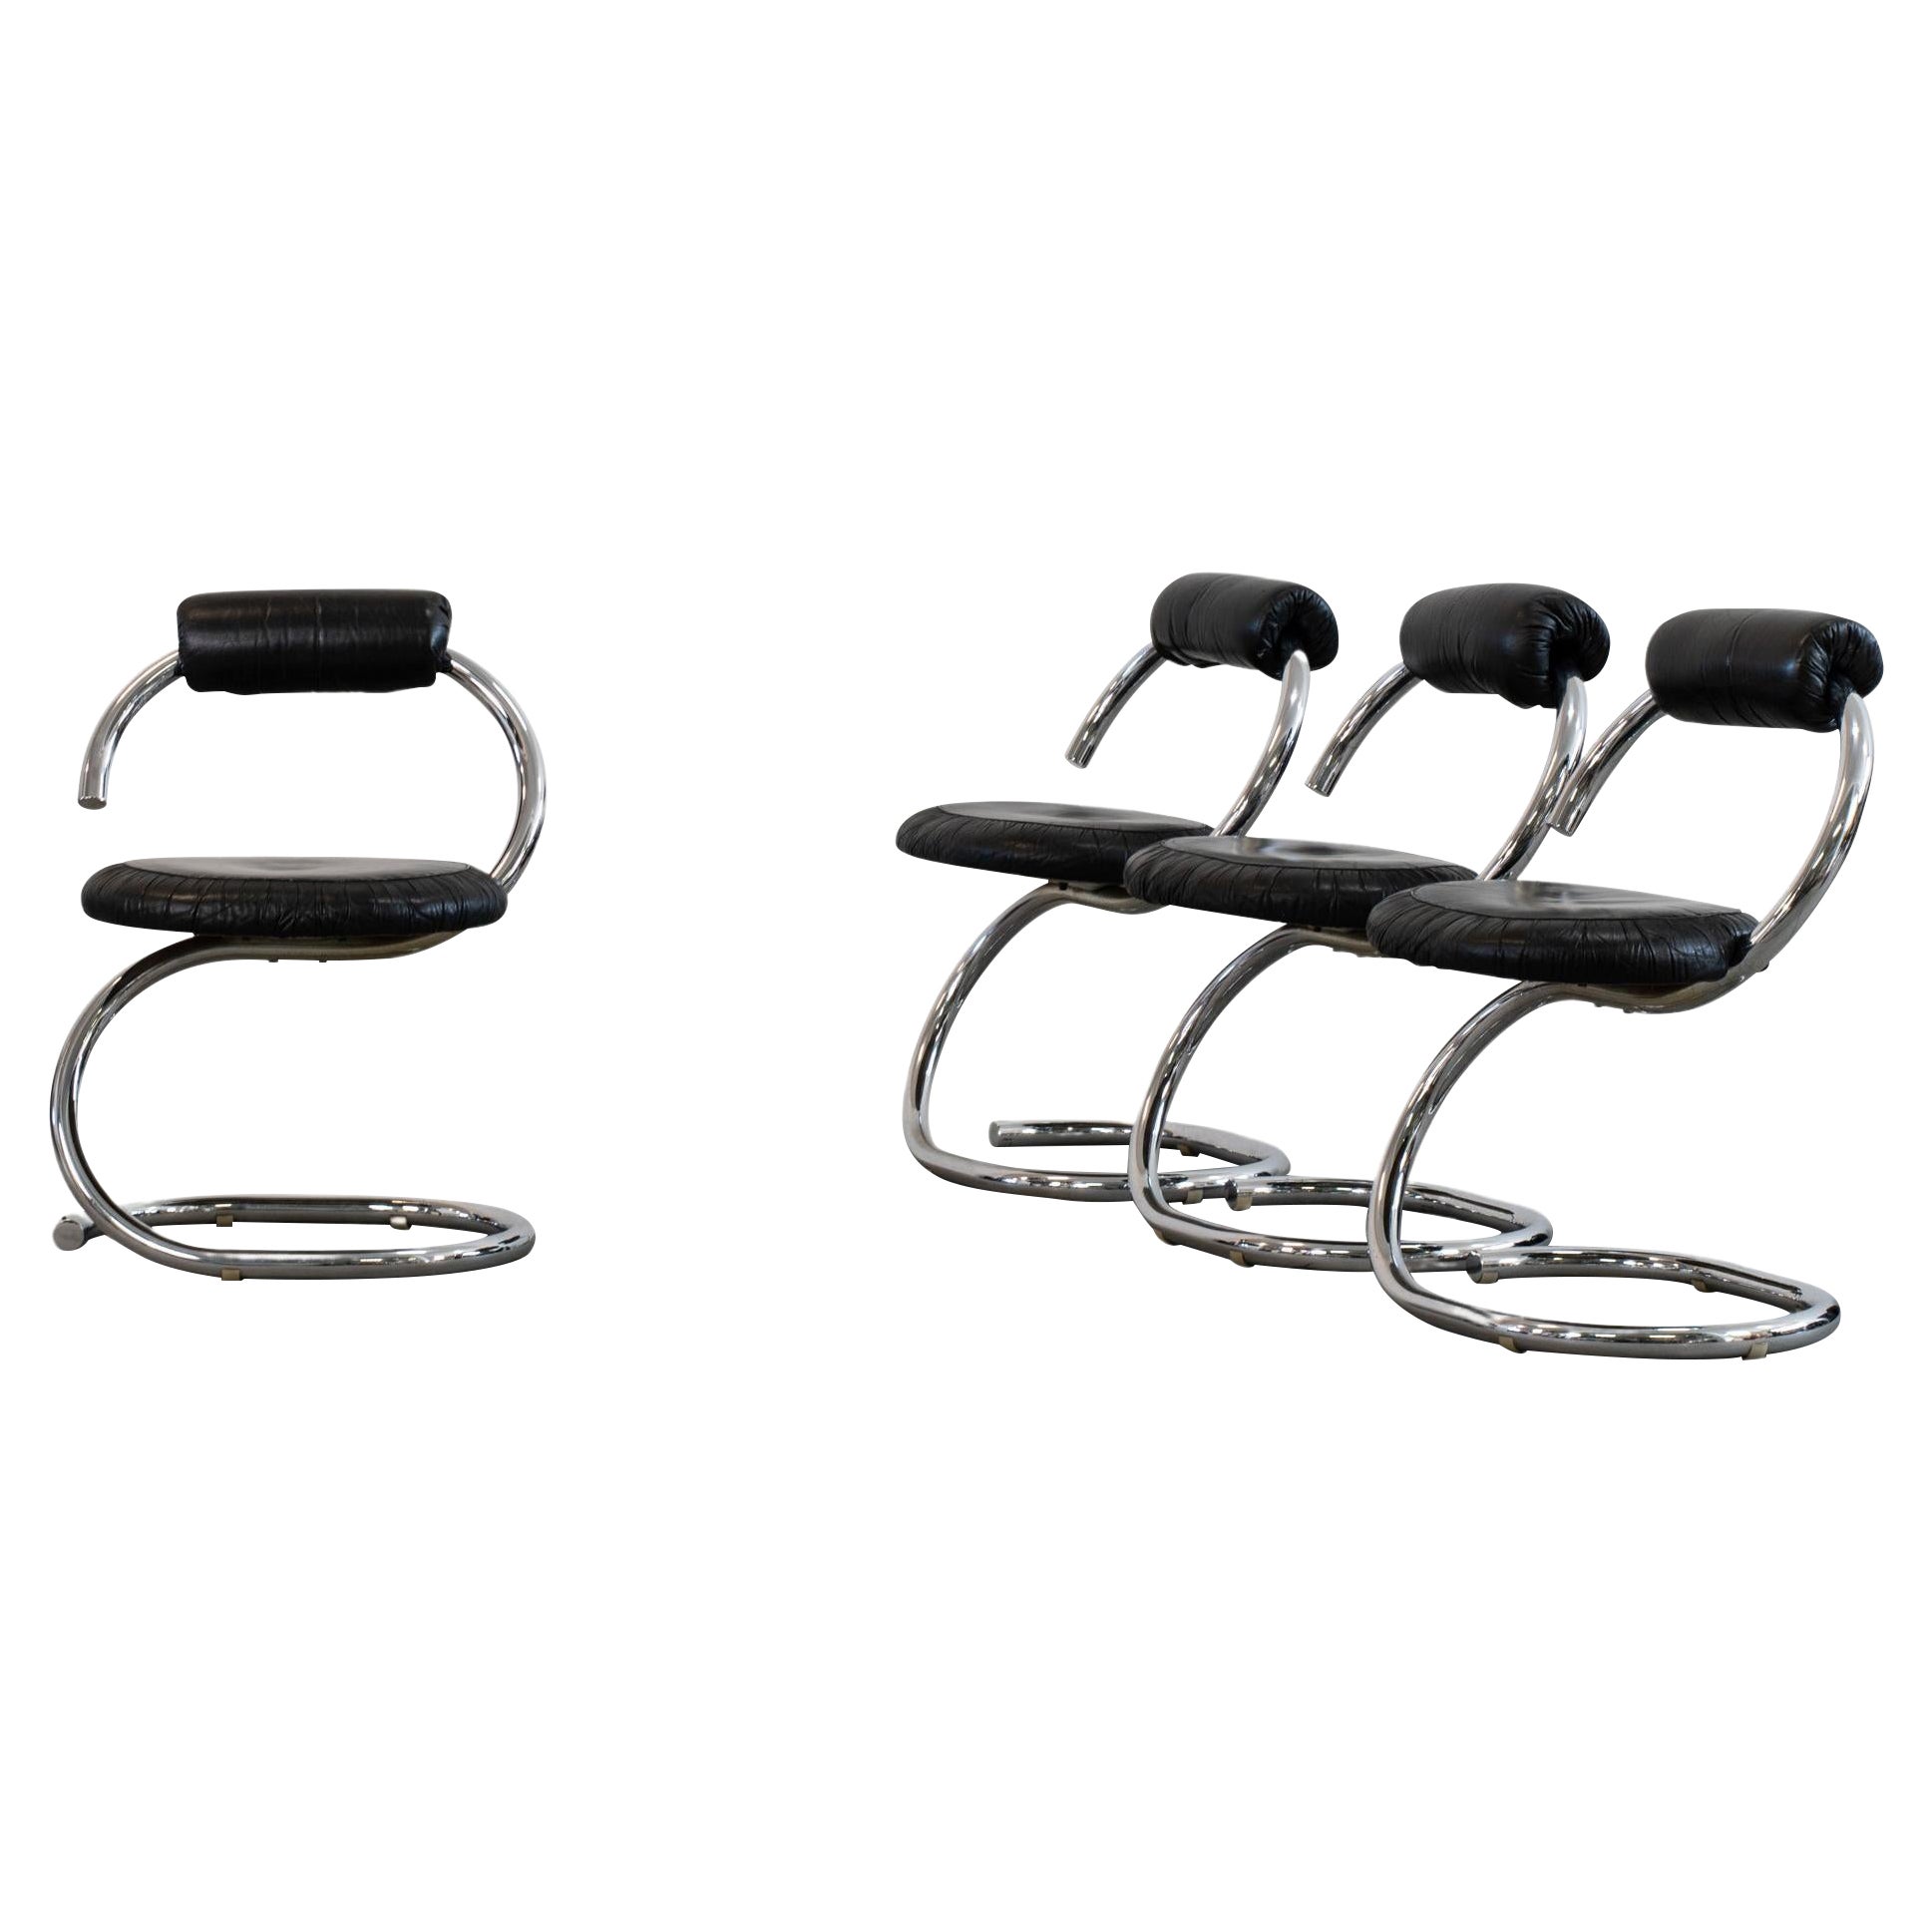 Giotto Stoppino Set of Four Cobra Chairs in Steel and Black Skai 1970s Italy